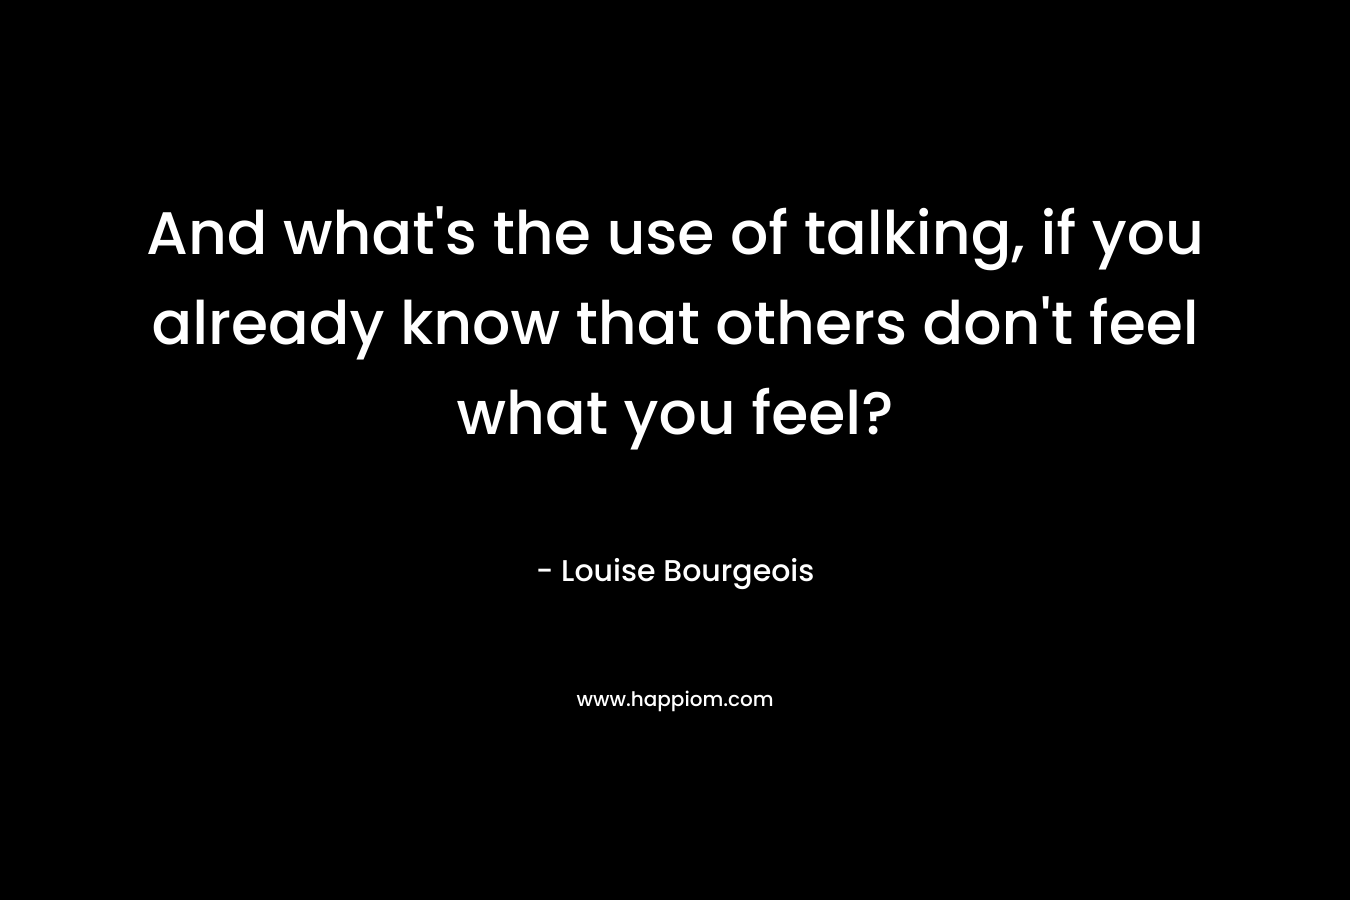 And what’s the use of talking, if you already know that others don’t feel what you feel? – Louise Bourgeois